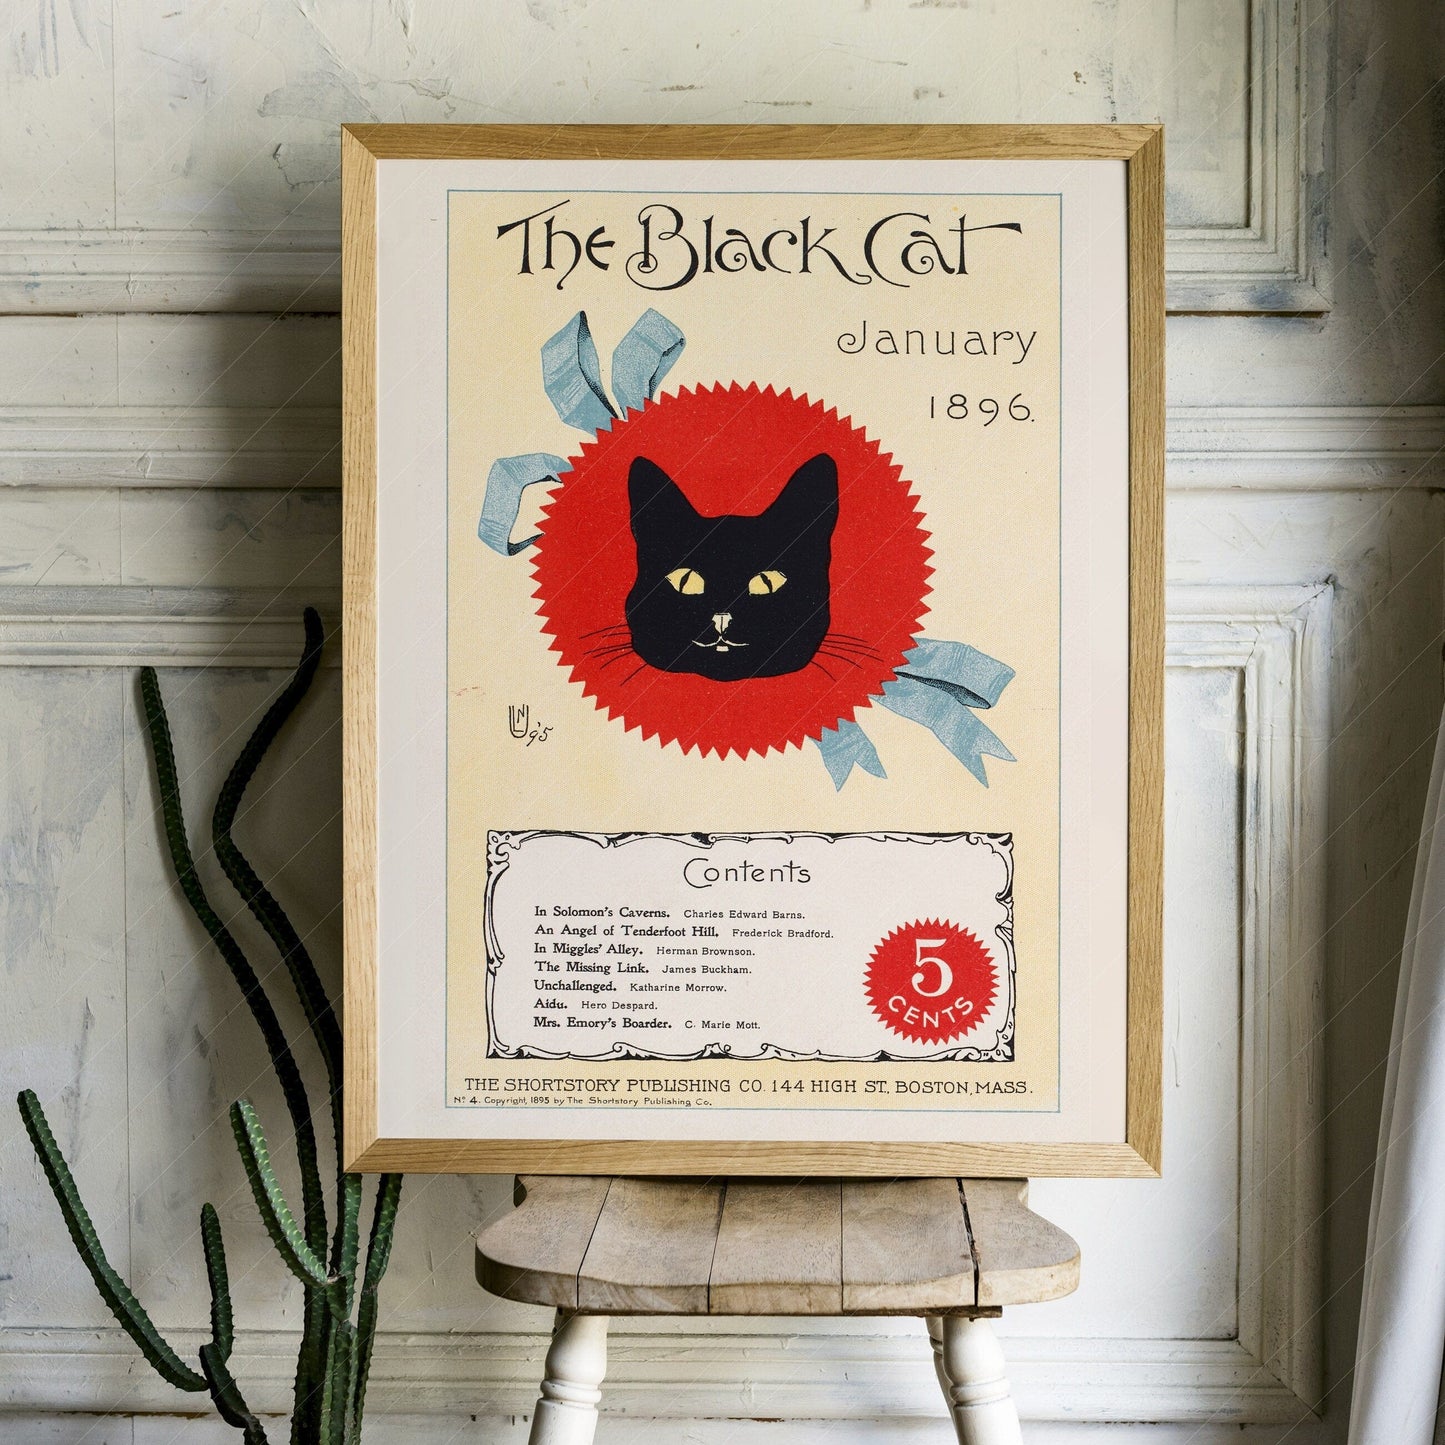 Home Poster Decor The Black Cat, Cat Lover Gift, Vintage Cat Wall Art, Cat Portrait, Animal Wall Art, Vintage Magazine, Le Chat Noir, Once Upon a Time, 1896